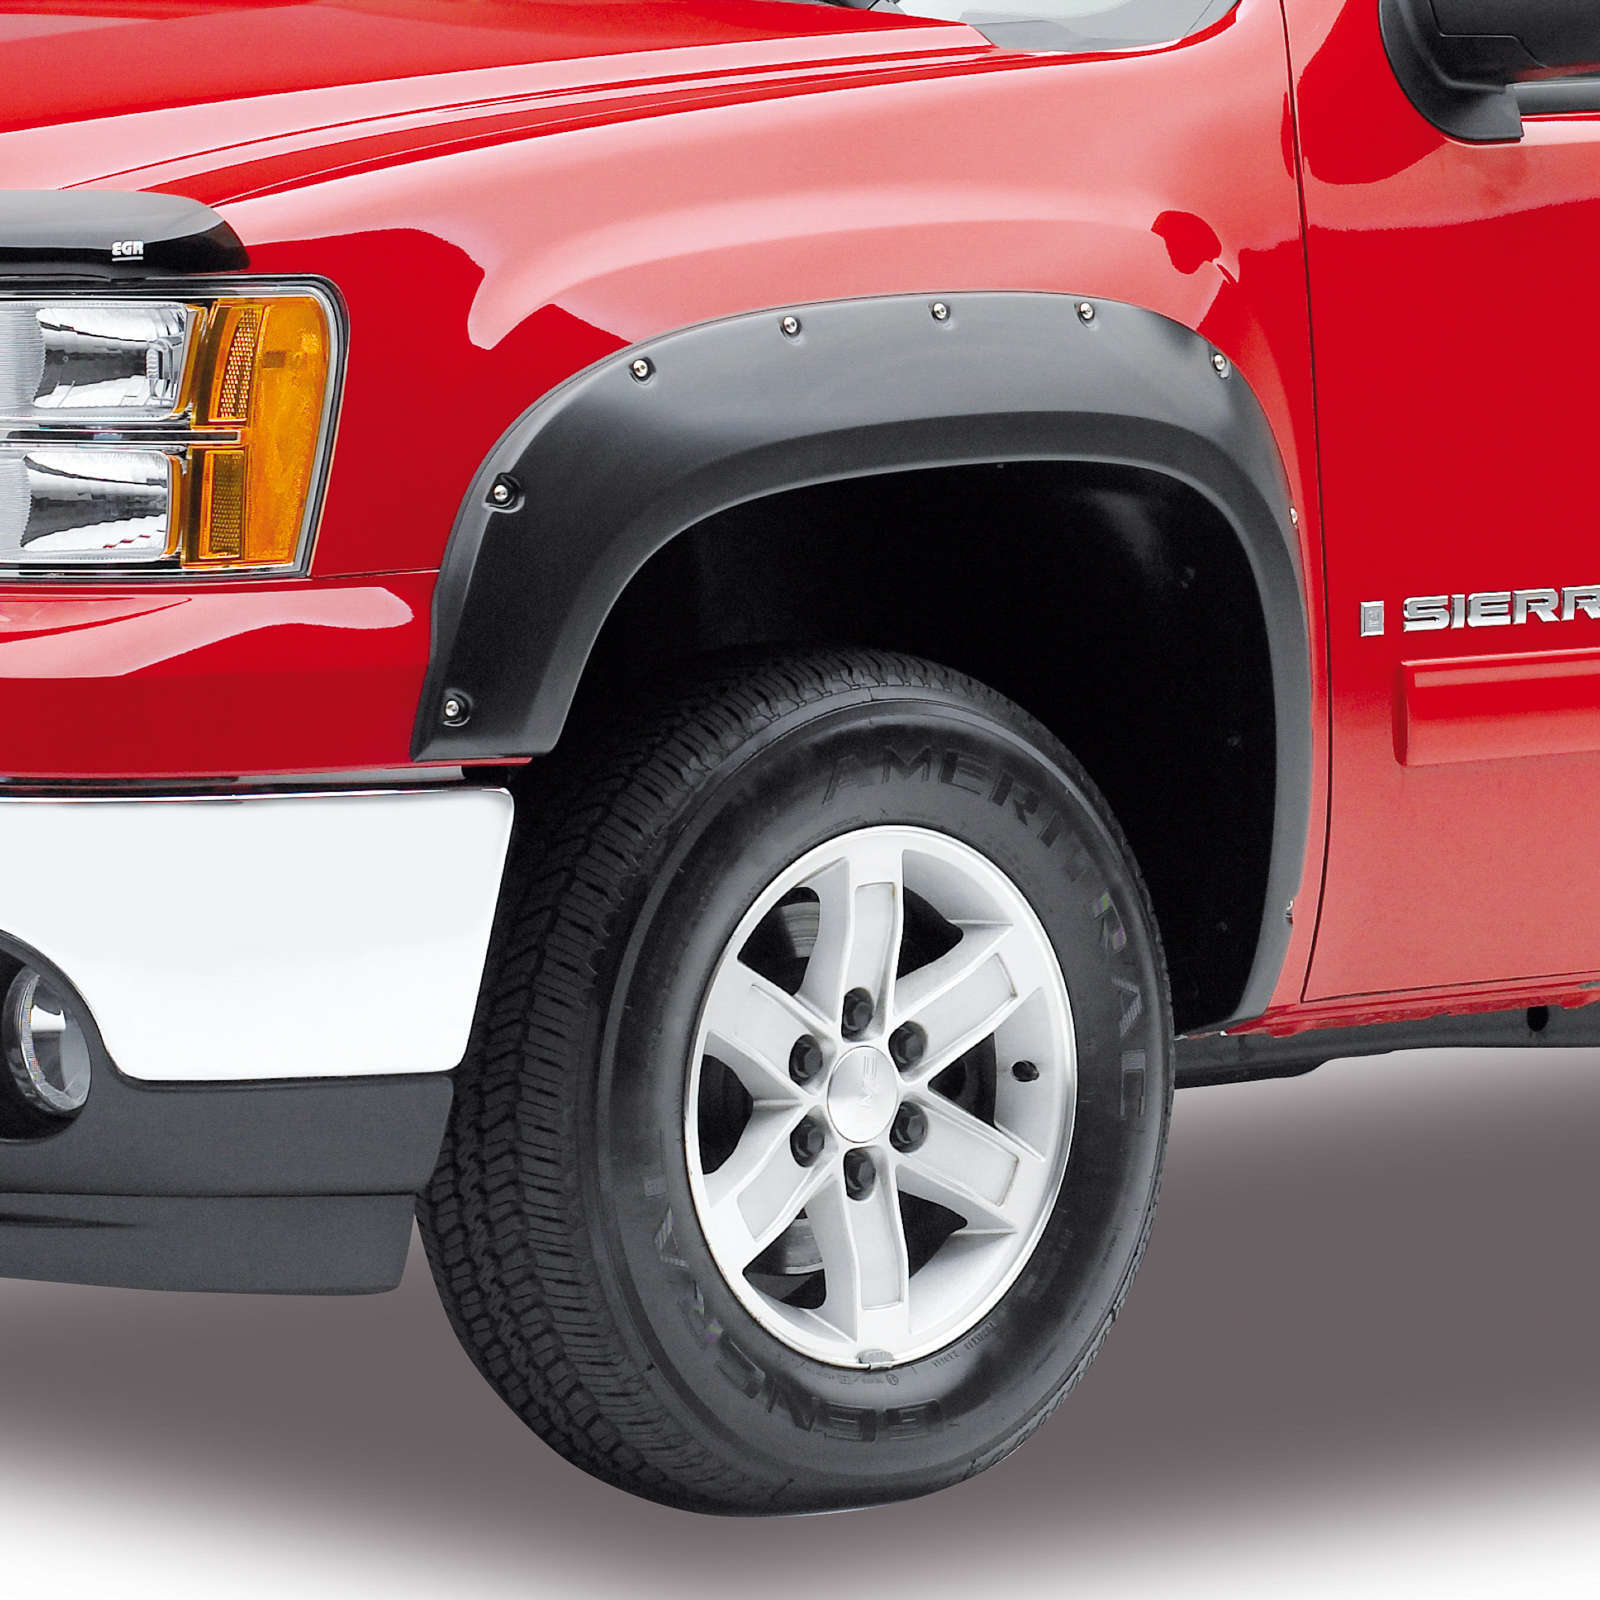 EGR 2007-2013 GMC Sierra 1500 Crew Cab Extended Cab Standard Cab Pickup 2 4 Door Short Box Only Set Of 4 Traditional Bolt-On Look Fender Flares 791414